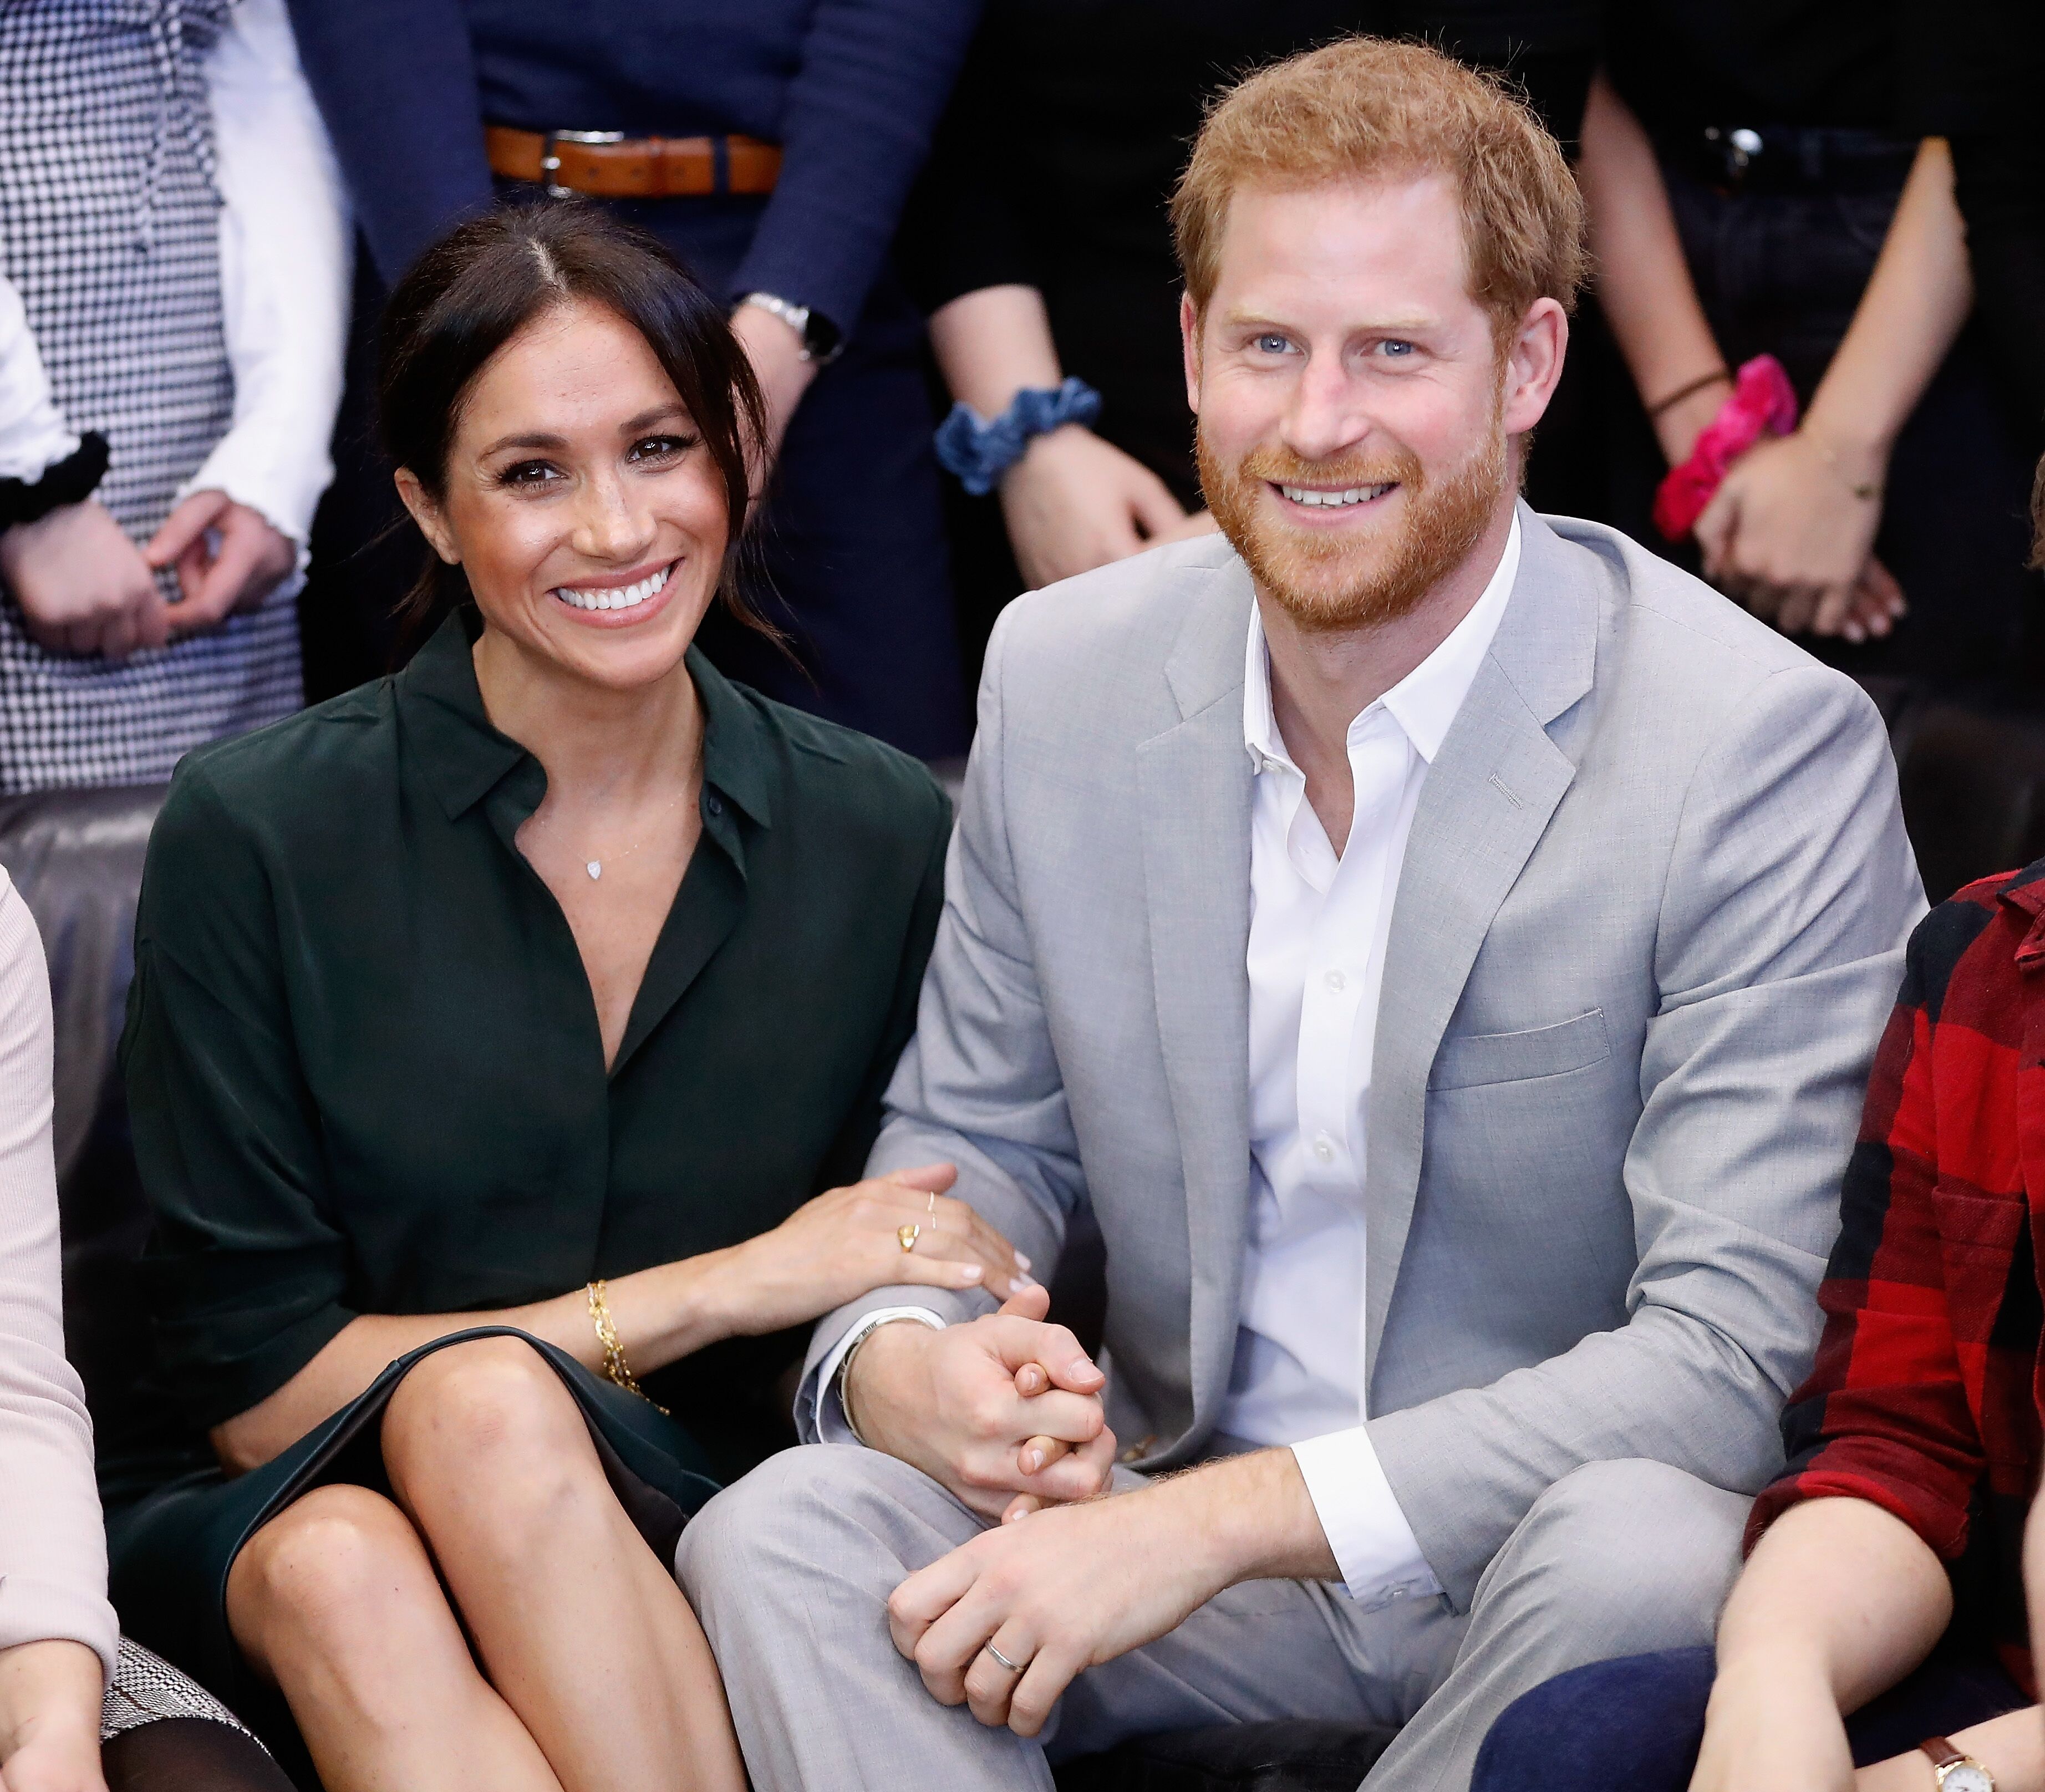 Meghan, Duchess of Sussex and Prince Harry, Duke of Sussex make an official visit to the Joff Youth Centre in Peacehaven, Sussex on October 3, 2018 | Photo: Getty Images